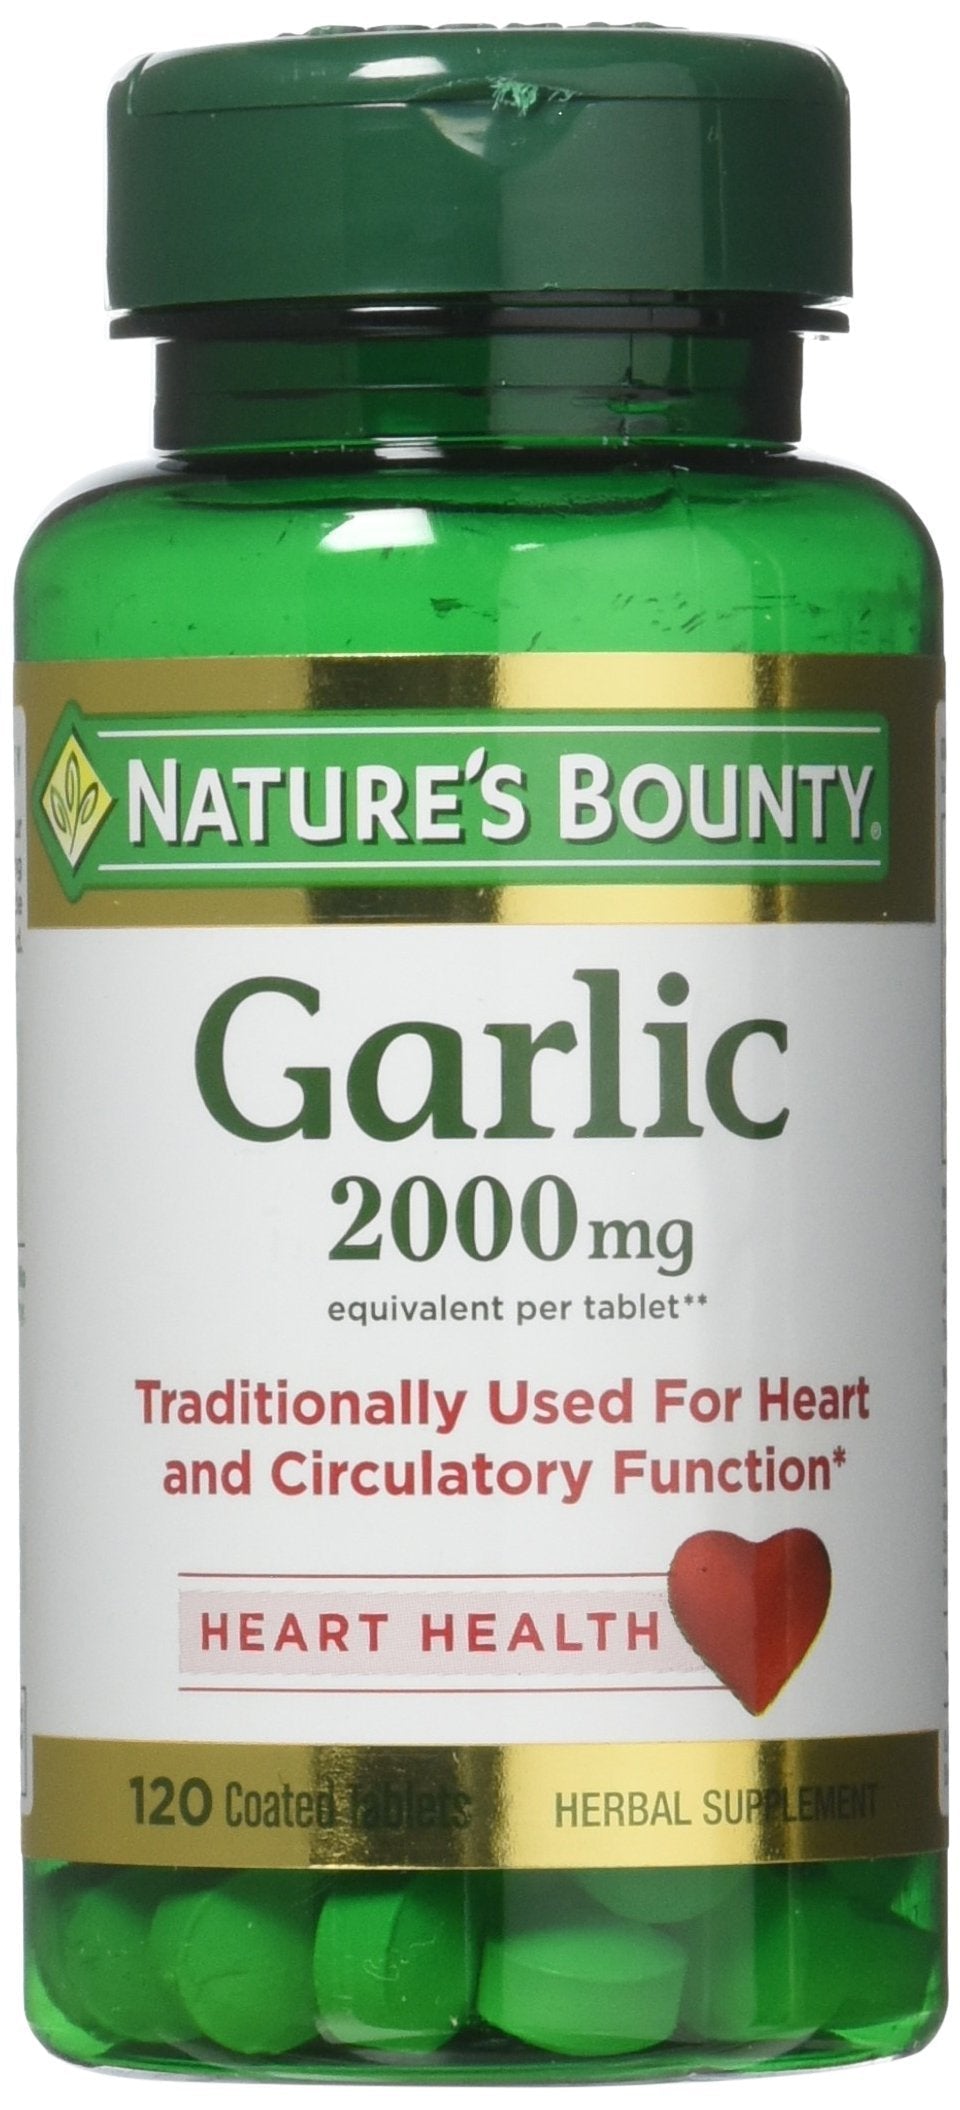 Nature's Bounty Garlic, 2000mg, 120 Coated Tablets (Pack of 2), 2 Bottles Each of 120 Tablets - BeesActive Australia